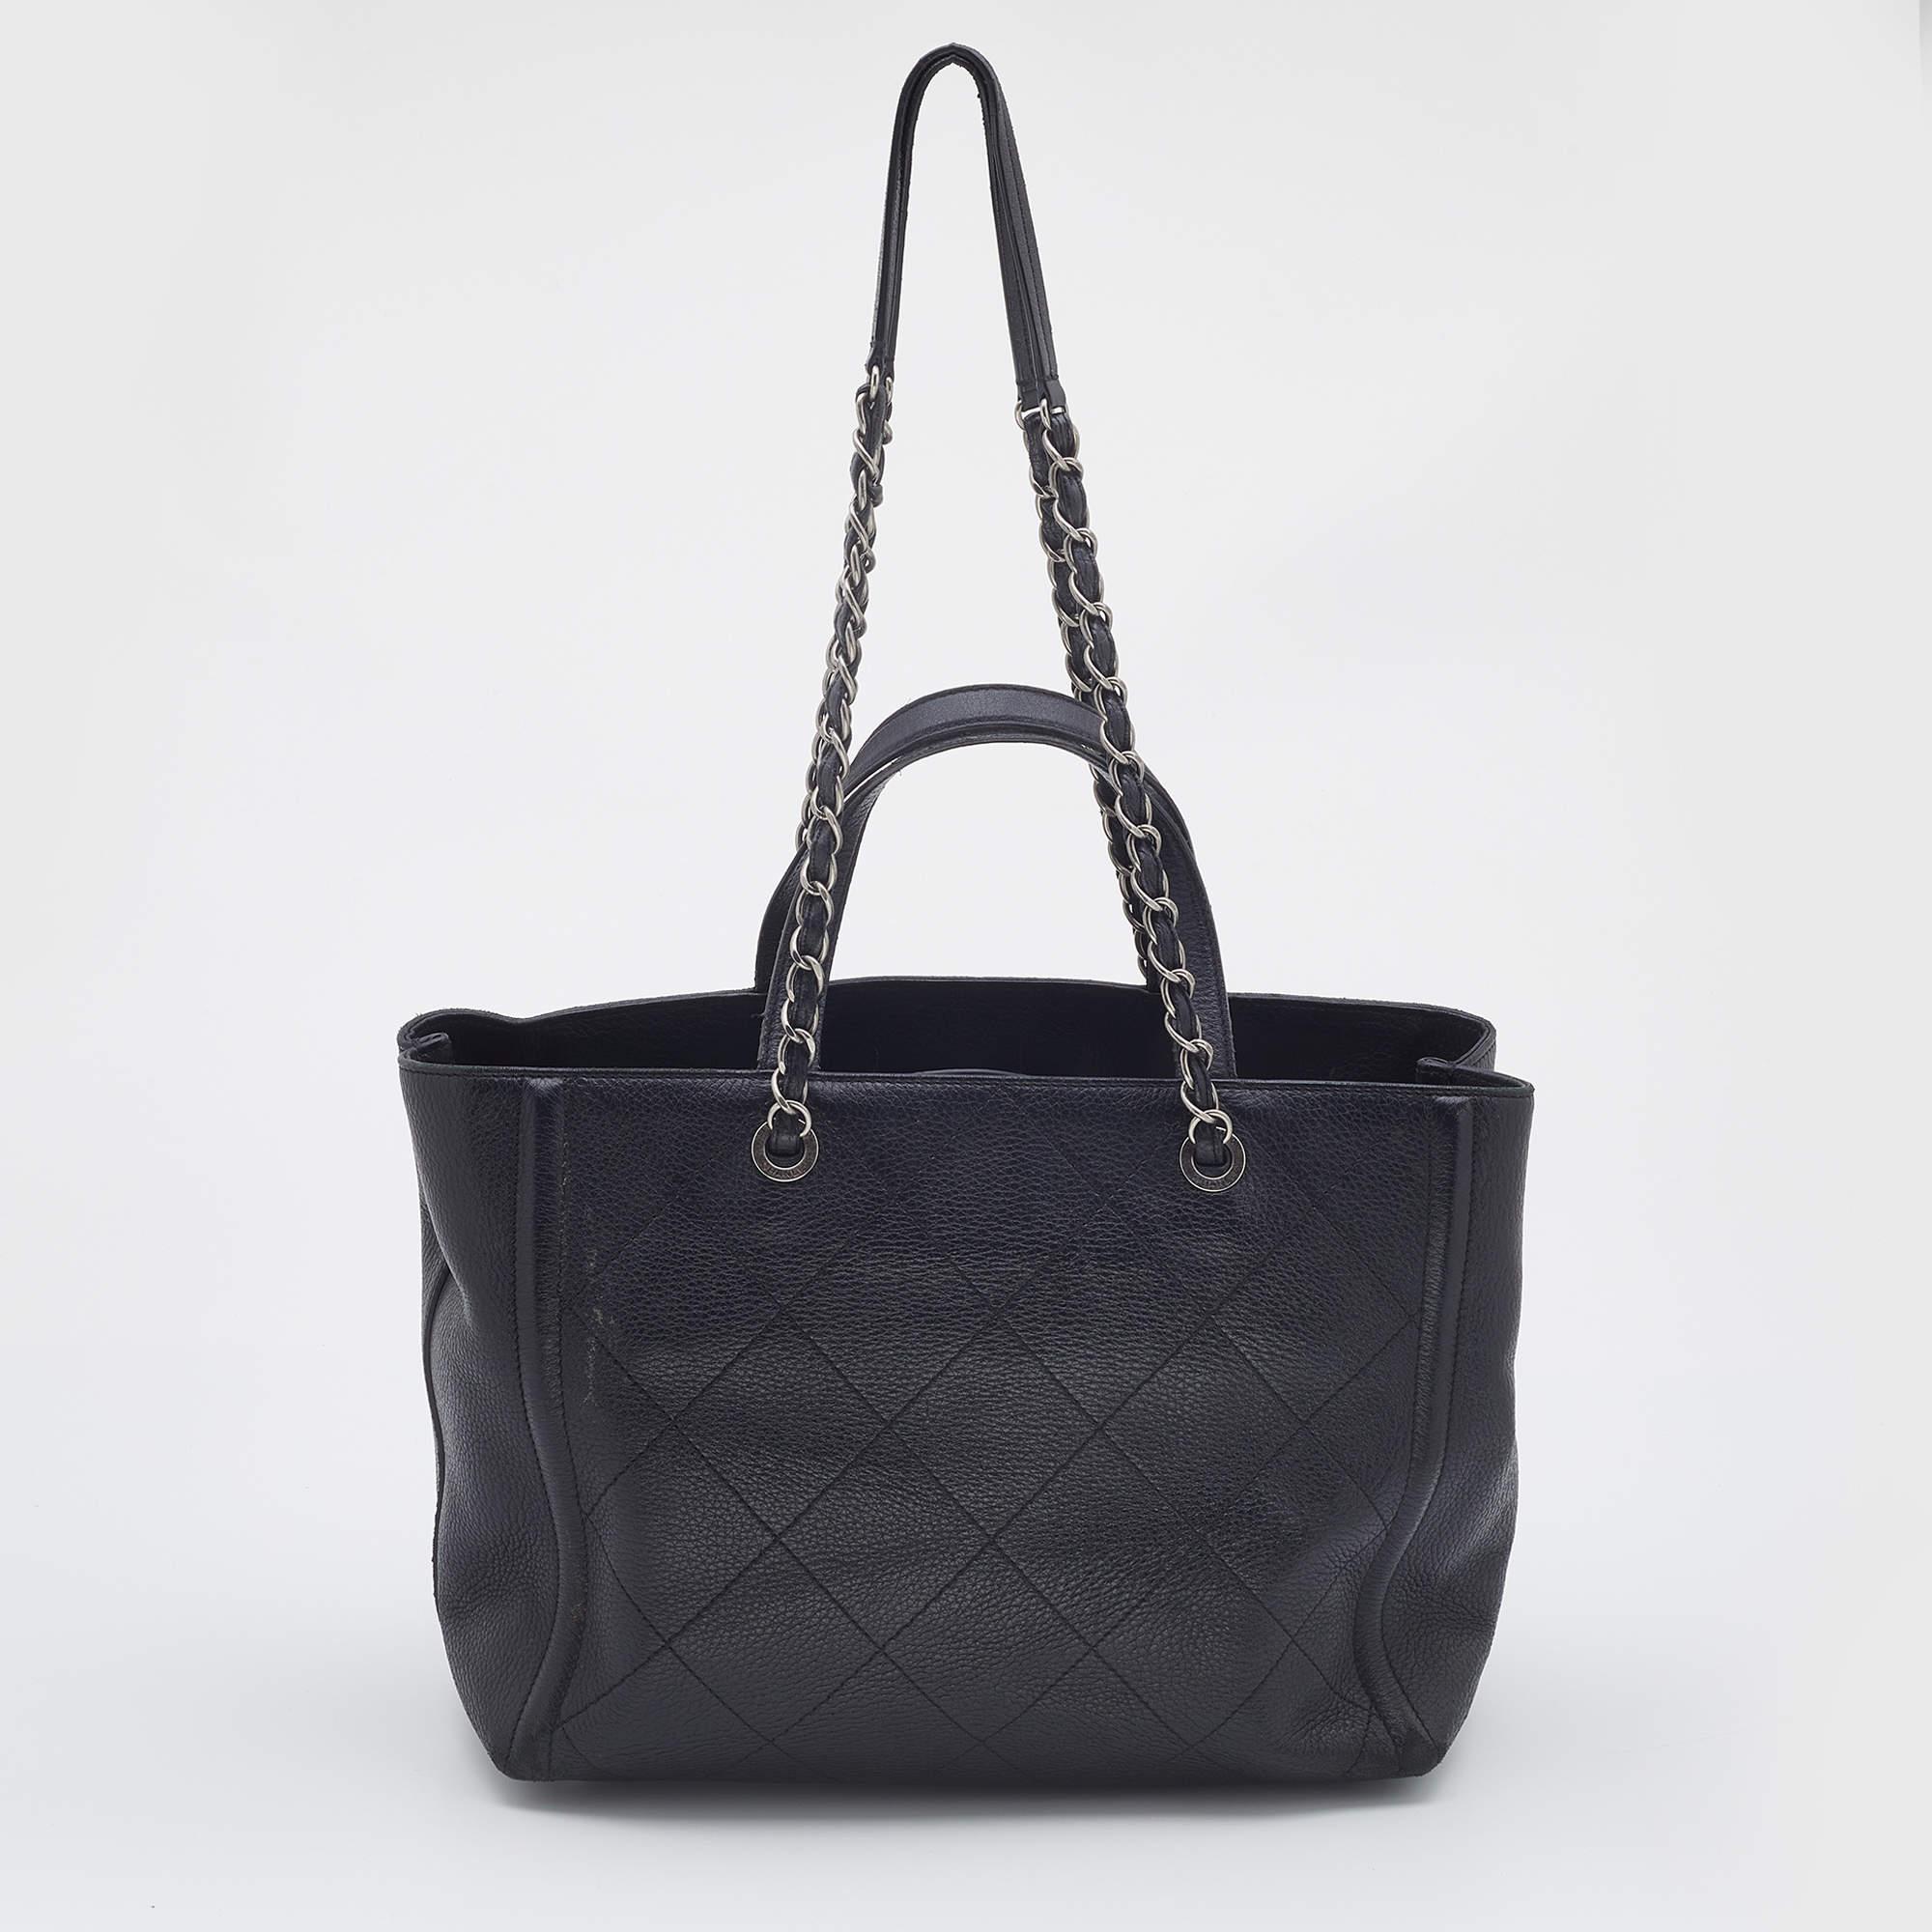 Women's Chanel Black Quilted Leather Medium CC Shopper Tote